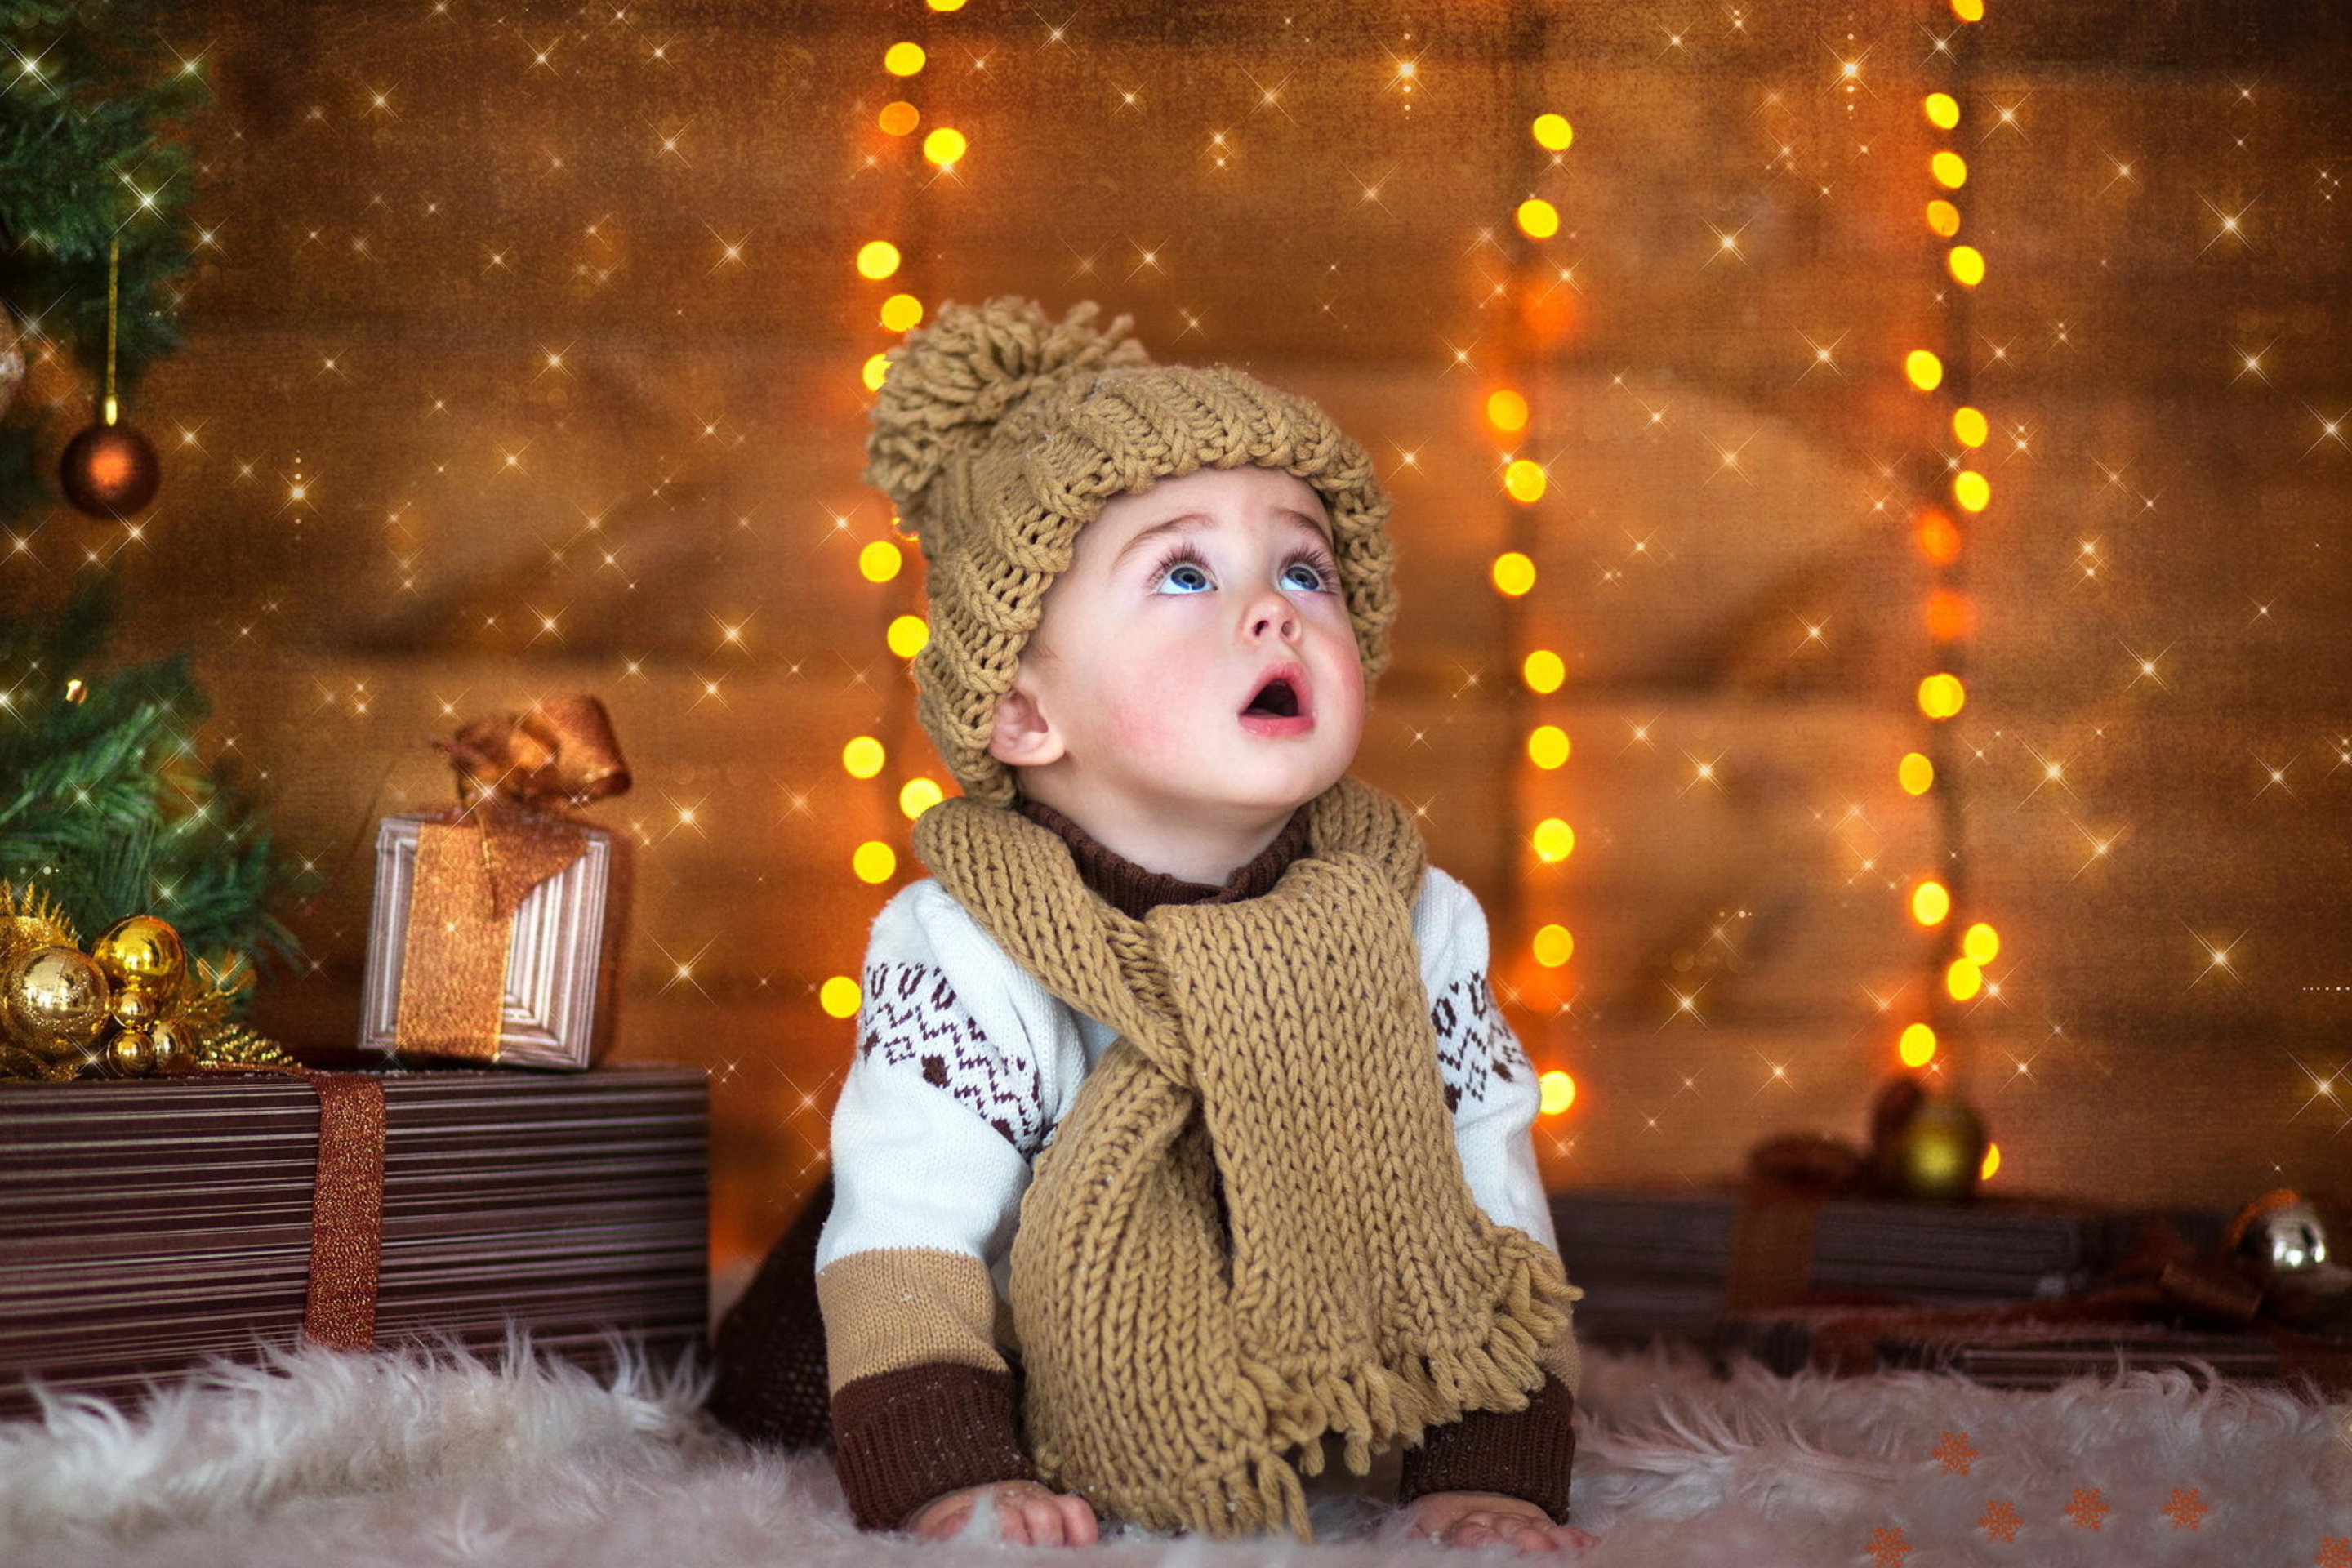 Cute Baby In Hat And Scarf wallpaper 2880x1920